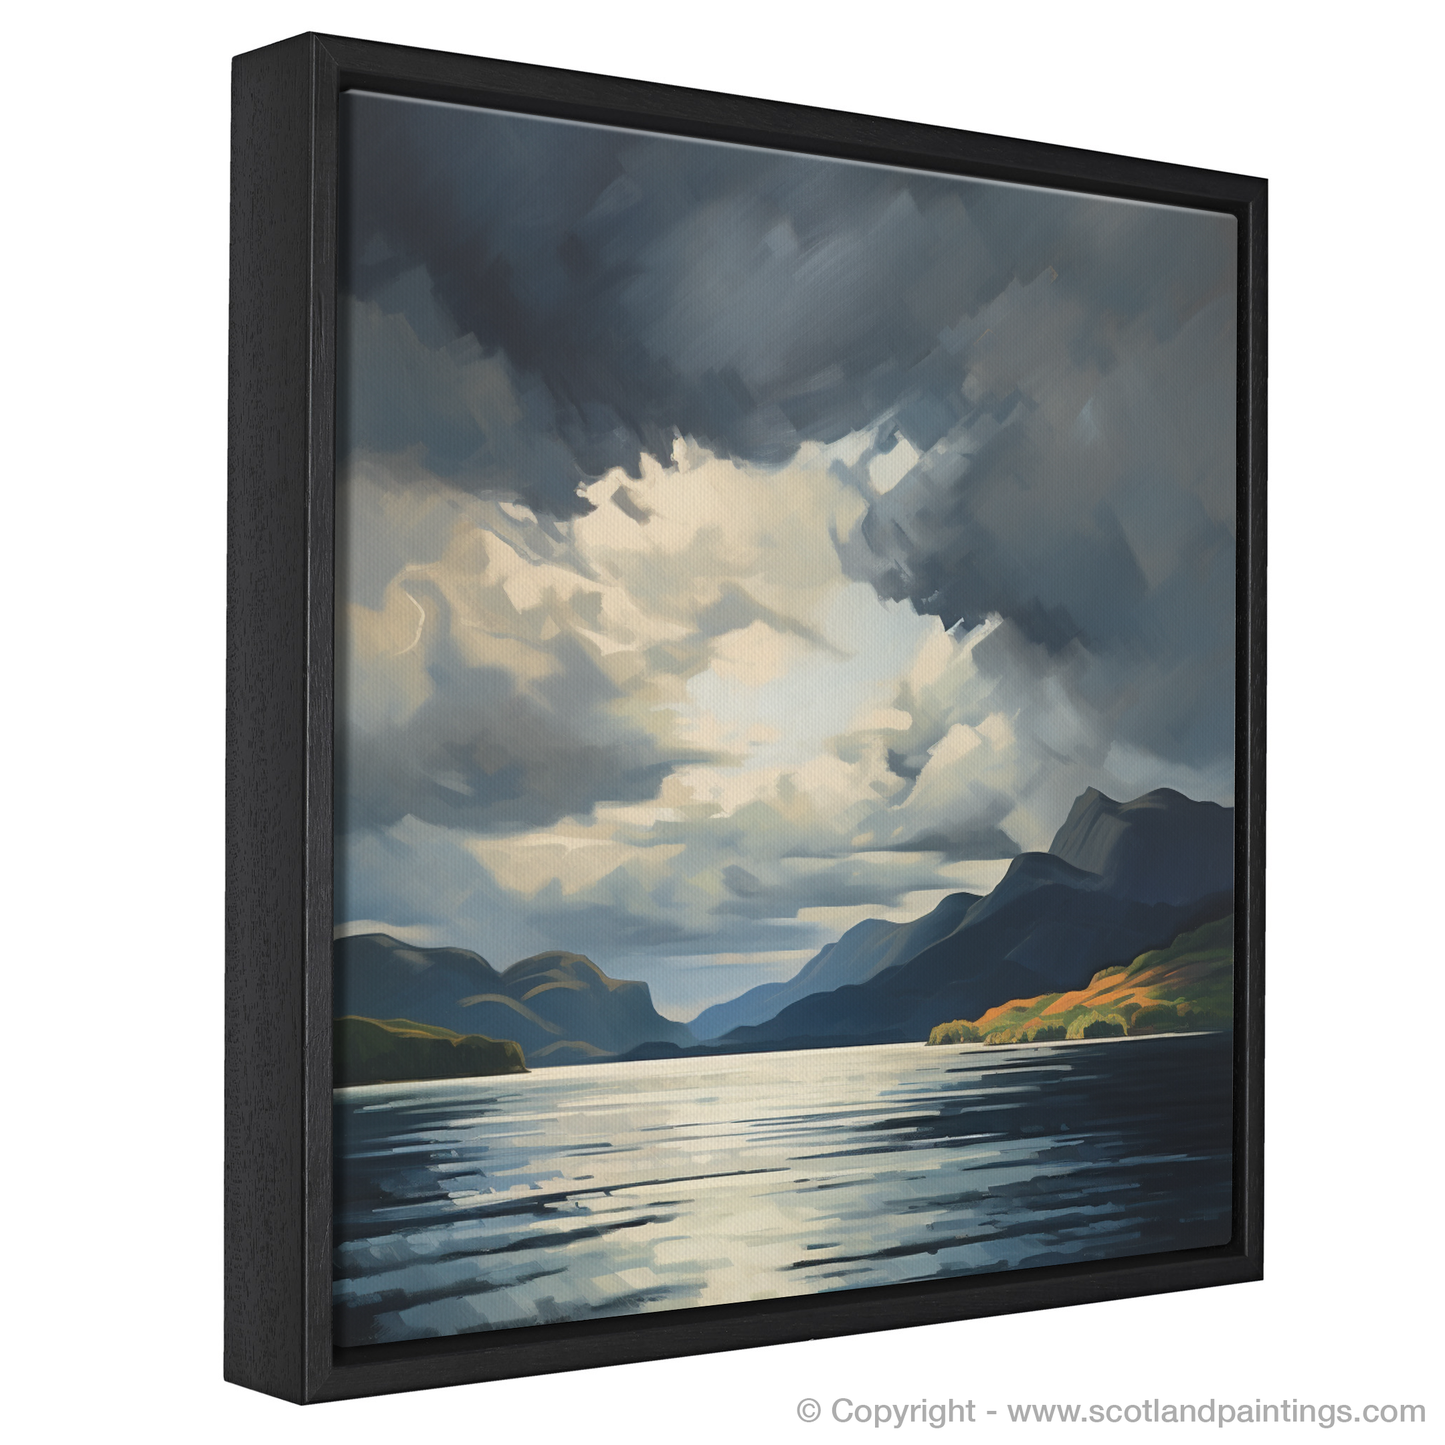 Painting and Art Print of Storm clouds above Loch Lomond entitled "Storm Clouds over Loch Lomond: A Study in Light and Shadow".